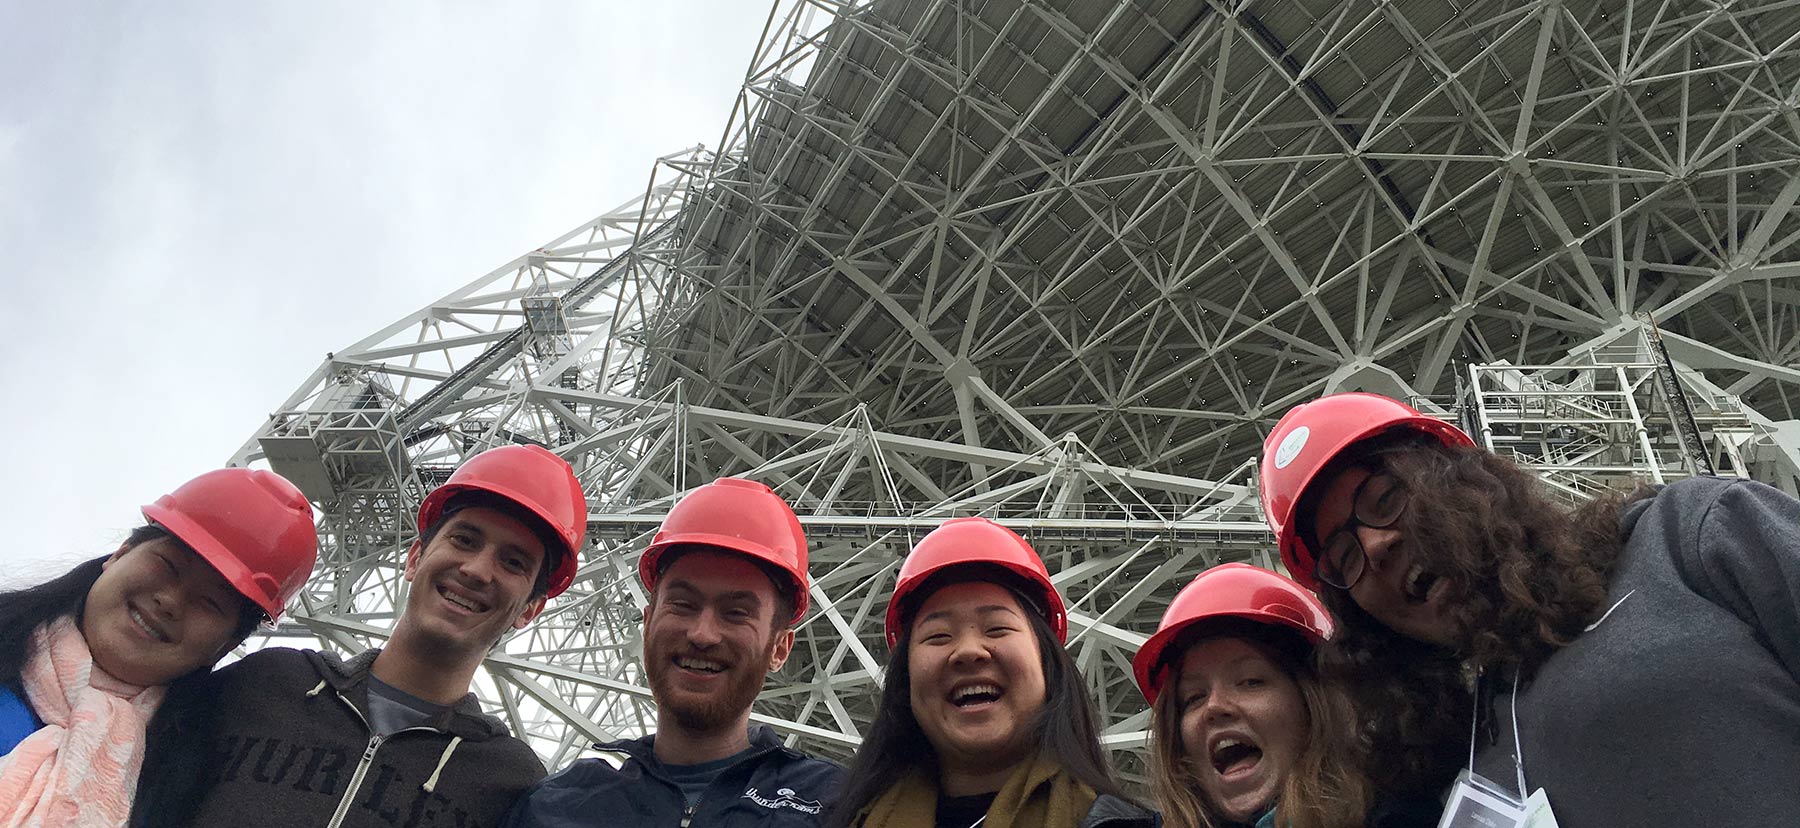 Students pose with the Green Bank Telescope in the background